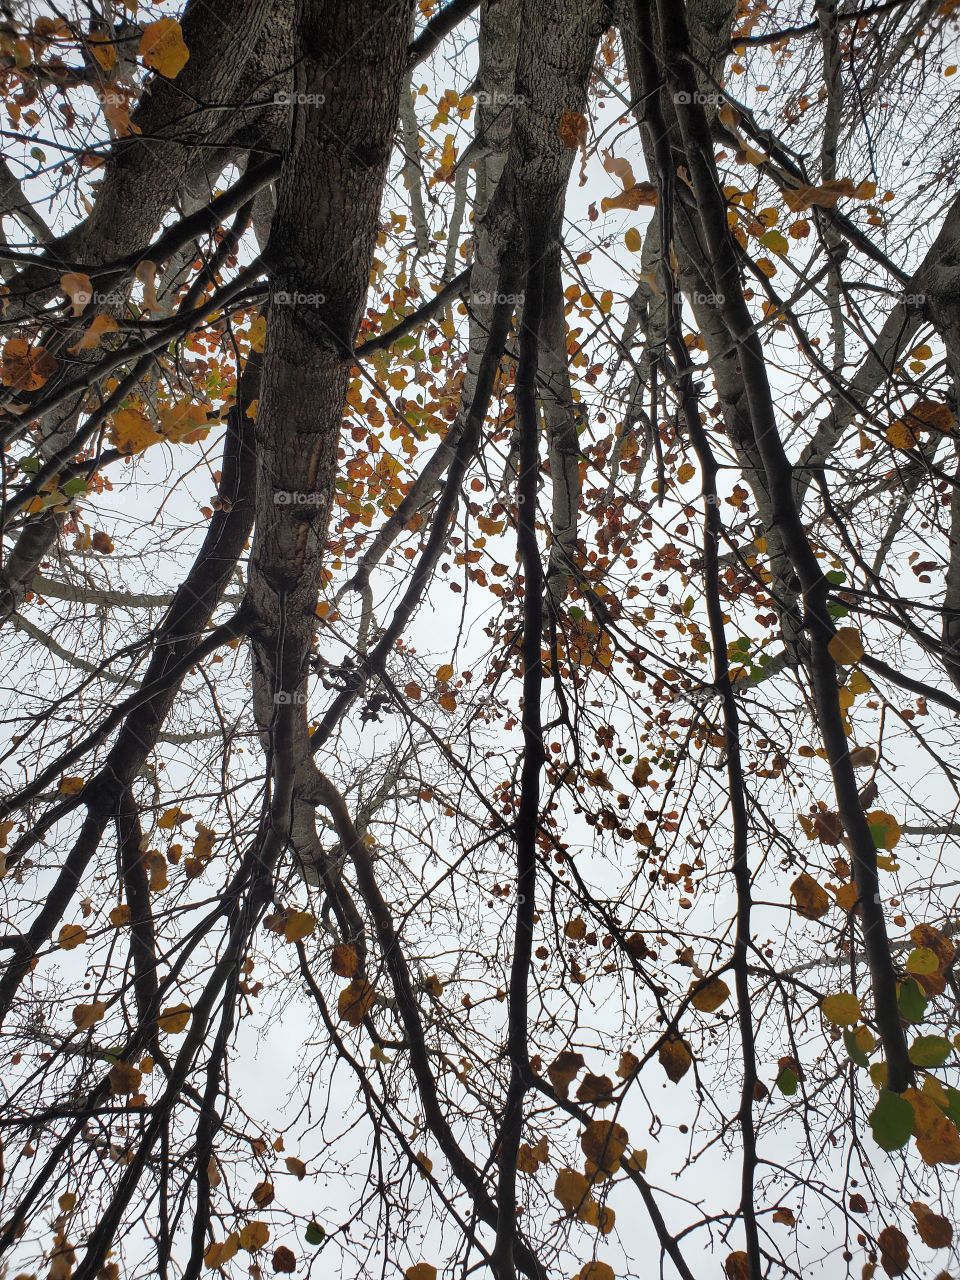 under canopy of leaves